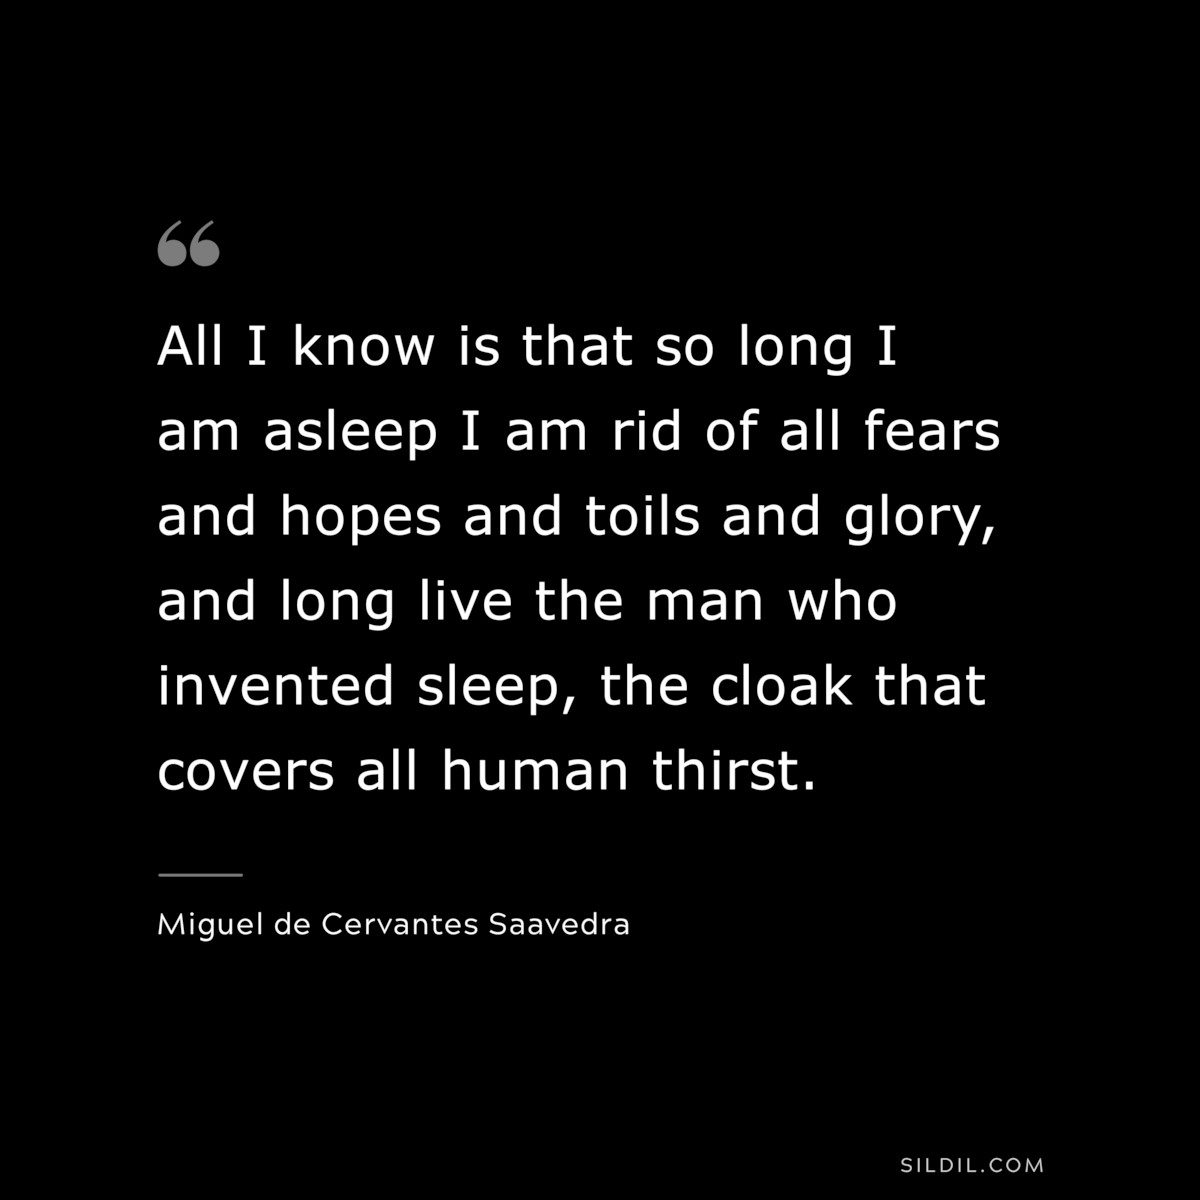 All I know is that so long I am asleep I am rid of all fears and hopes and toils and glory, and long live the man who invented sleep, the cloak that covers all human thirst. ― Miguel de Cervantes Saavedra